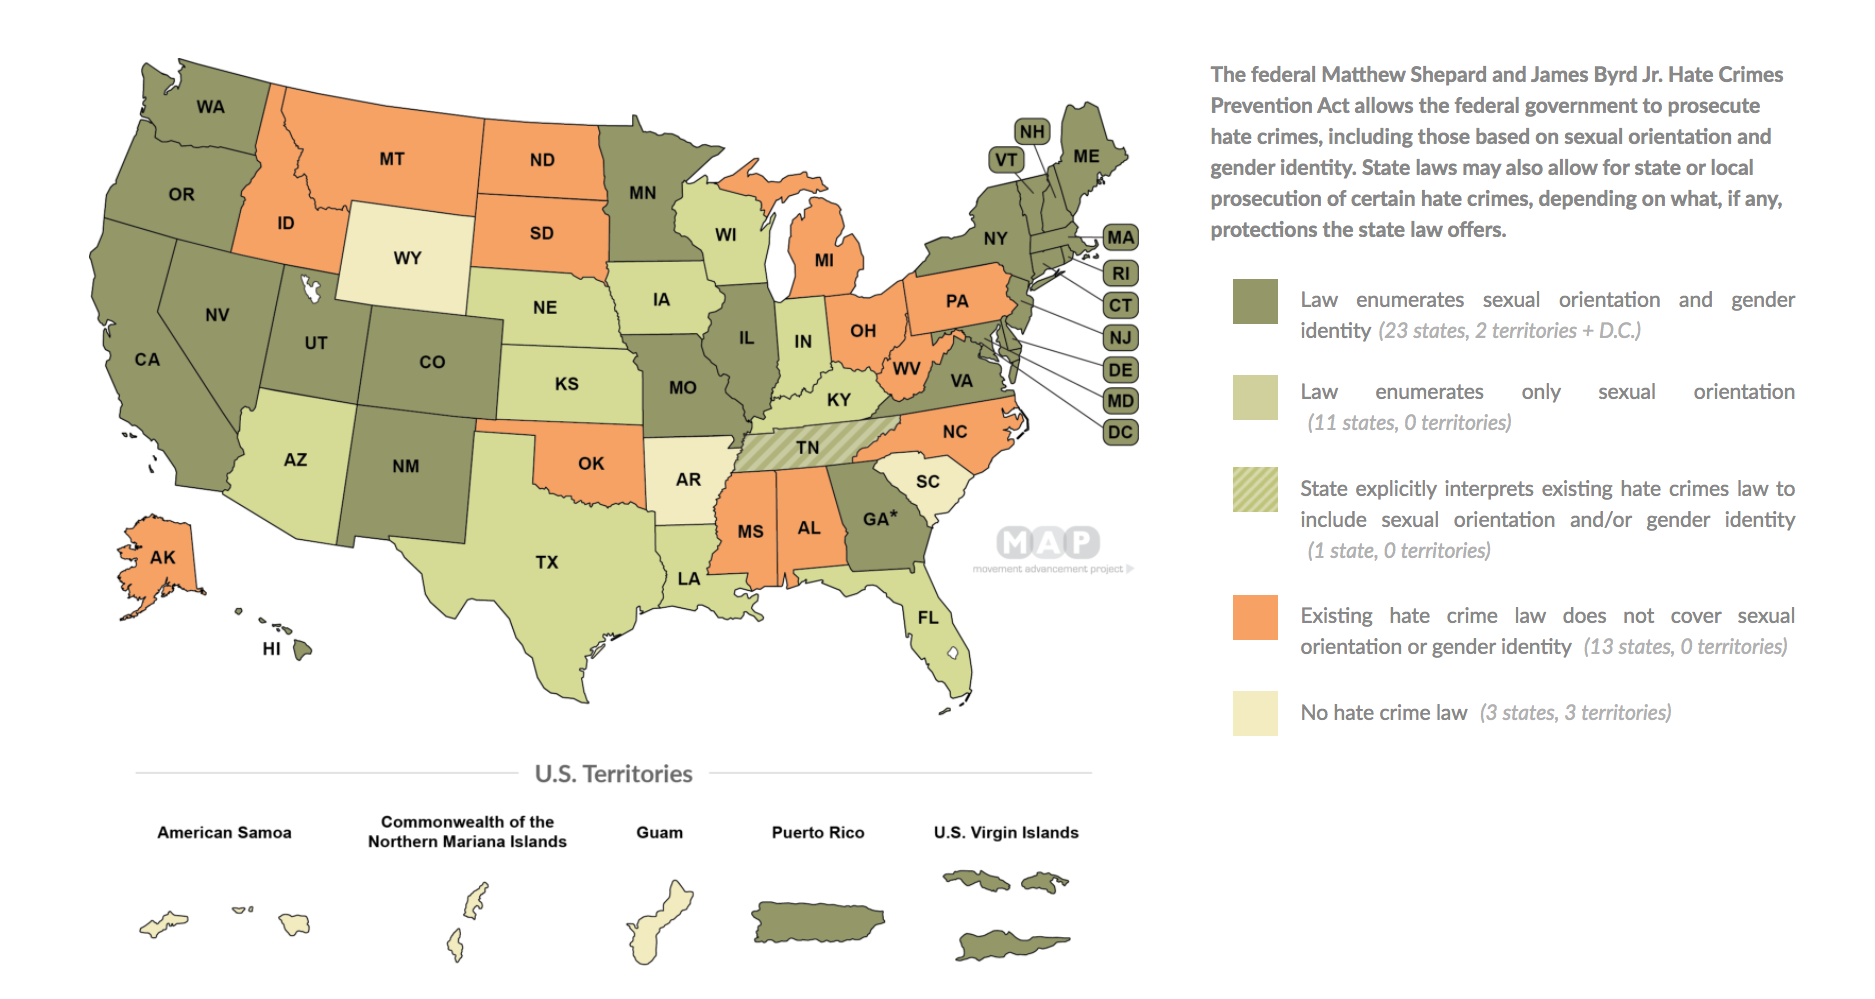 Map of the United States, policies for hate crime and sexual identities.